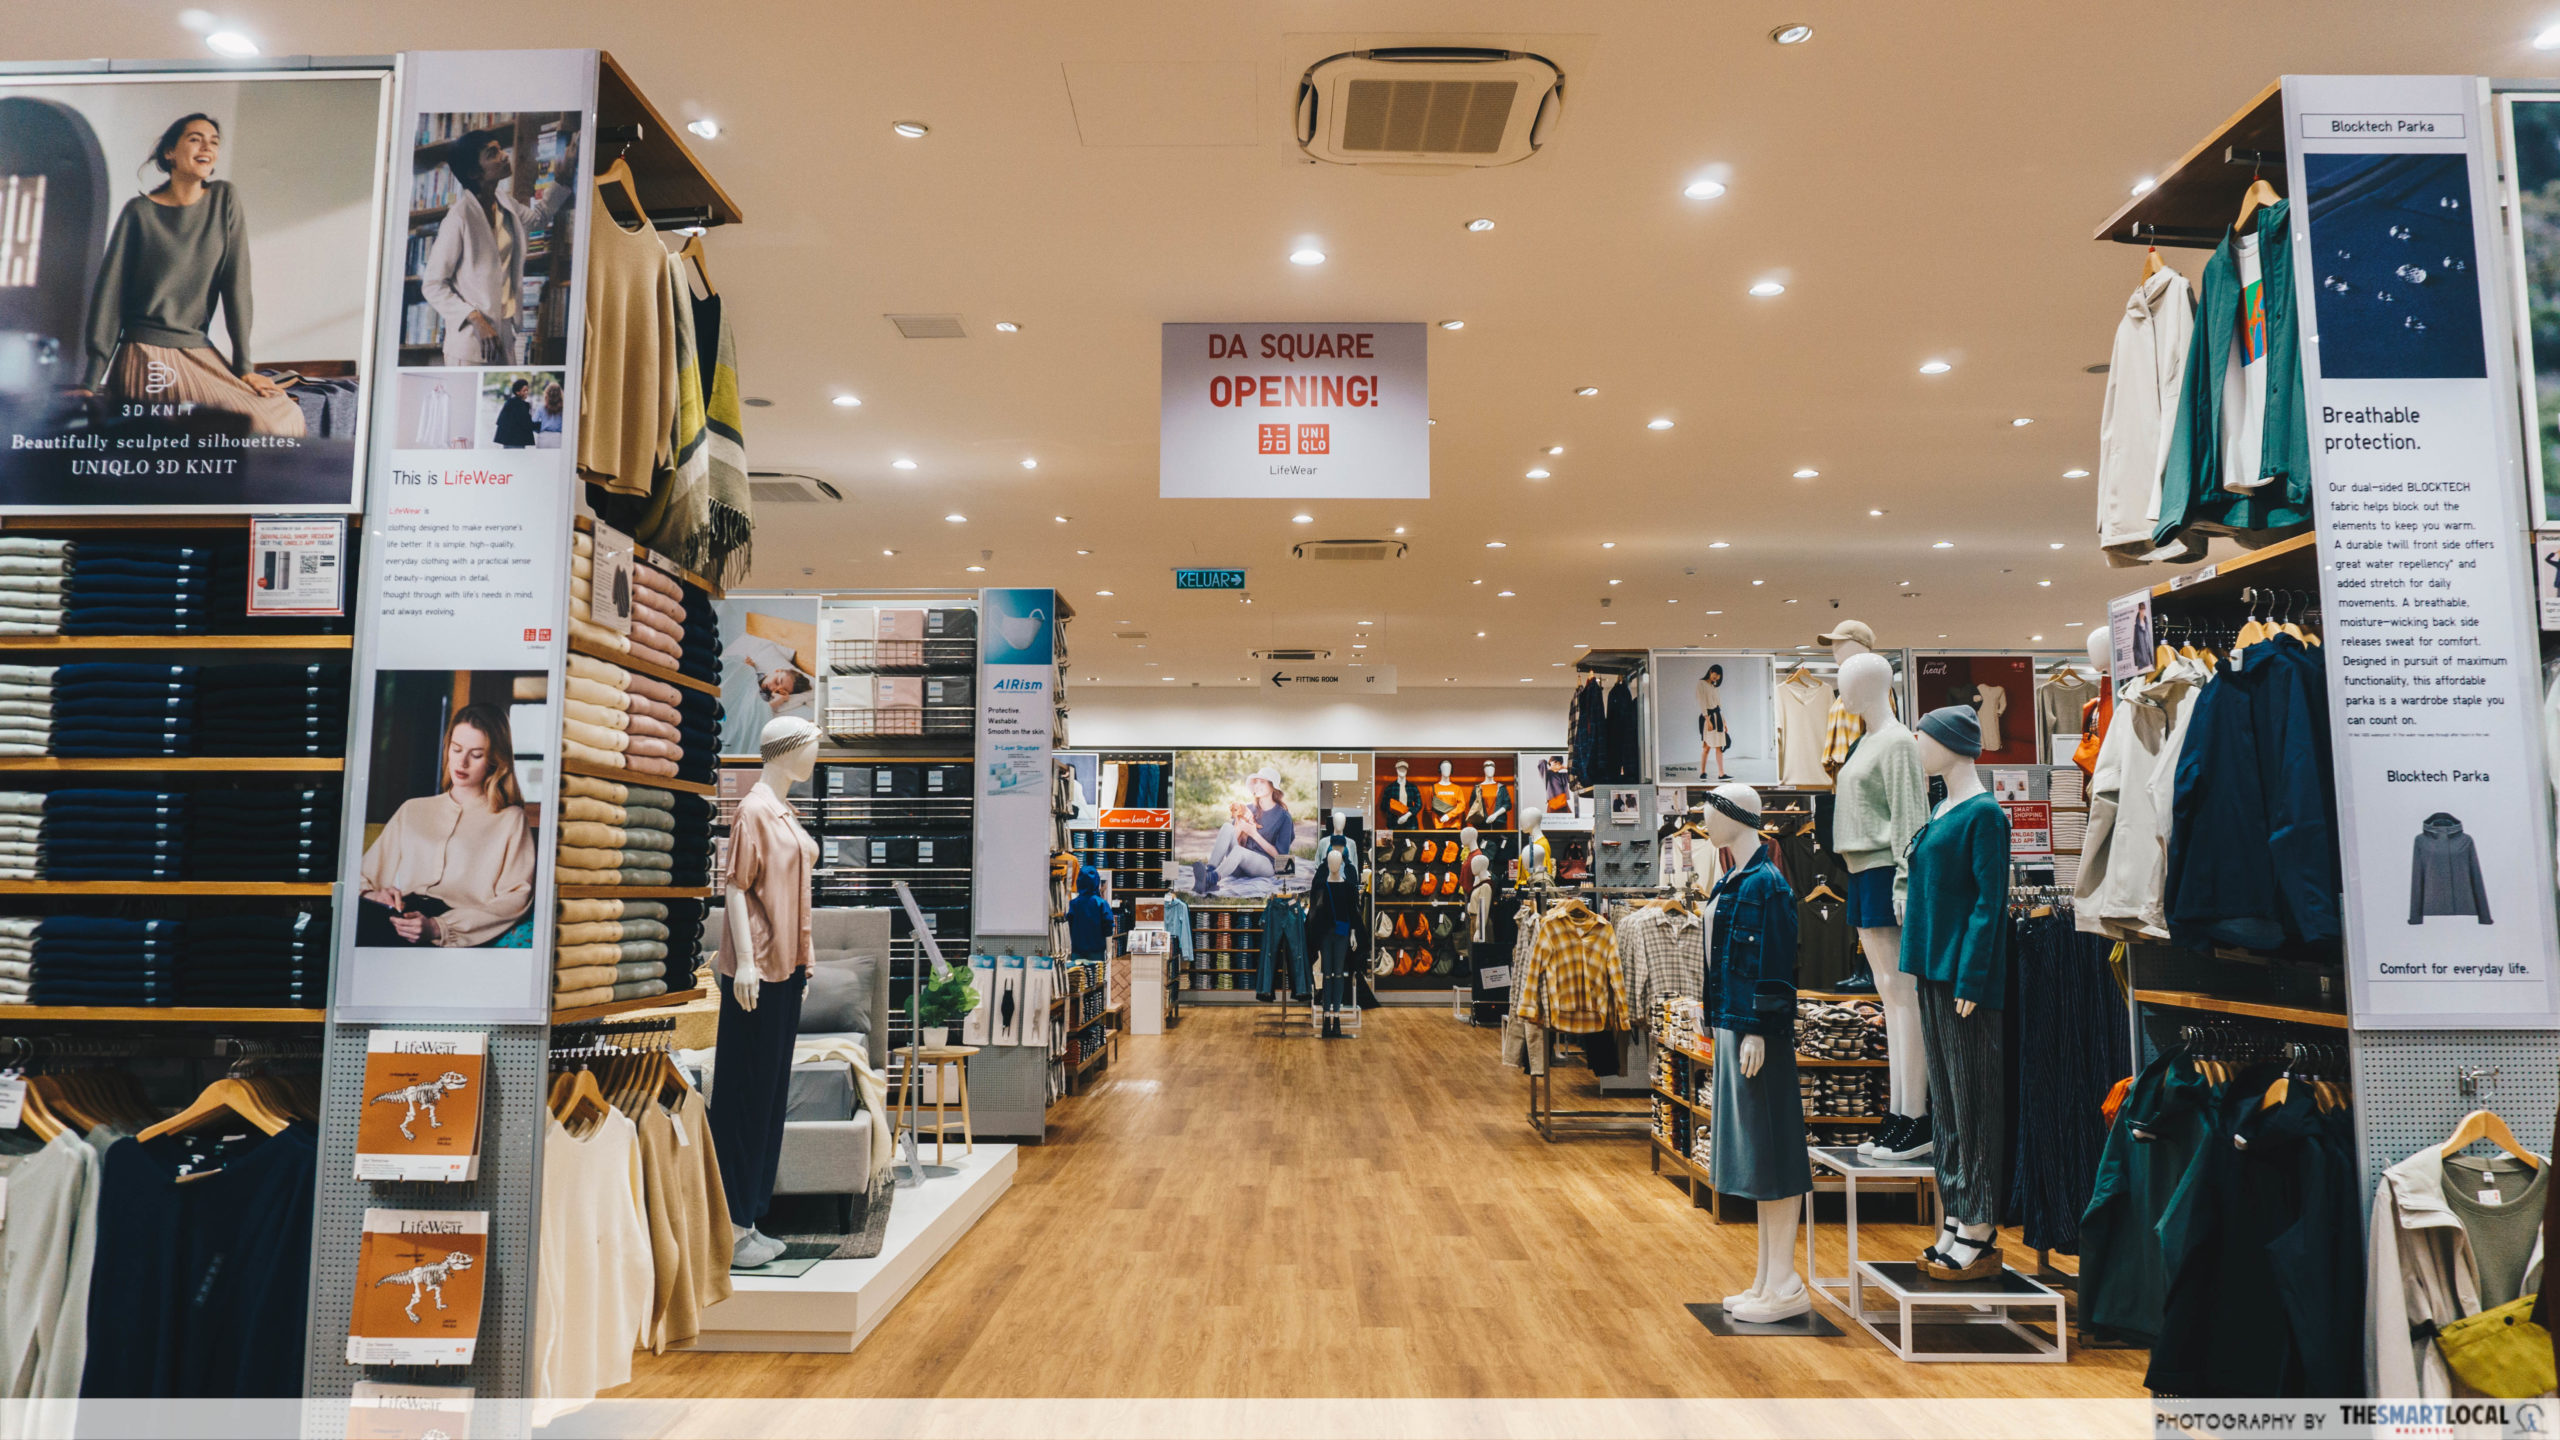 History Asia bares story behind the brand name Uniqlo